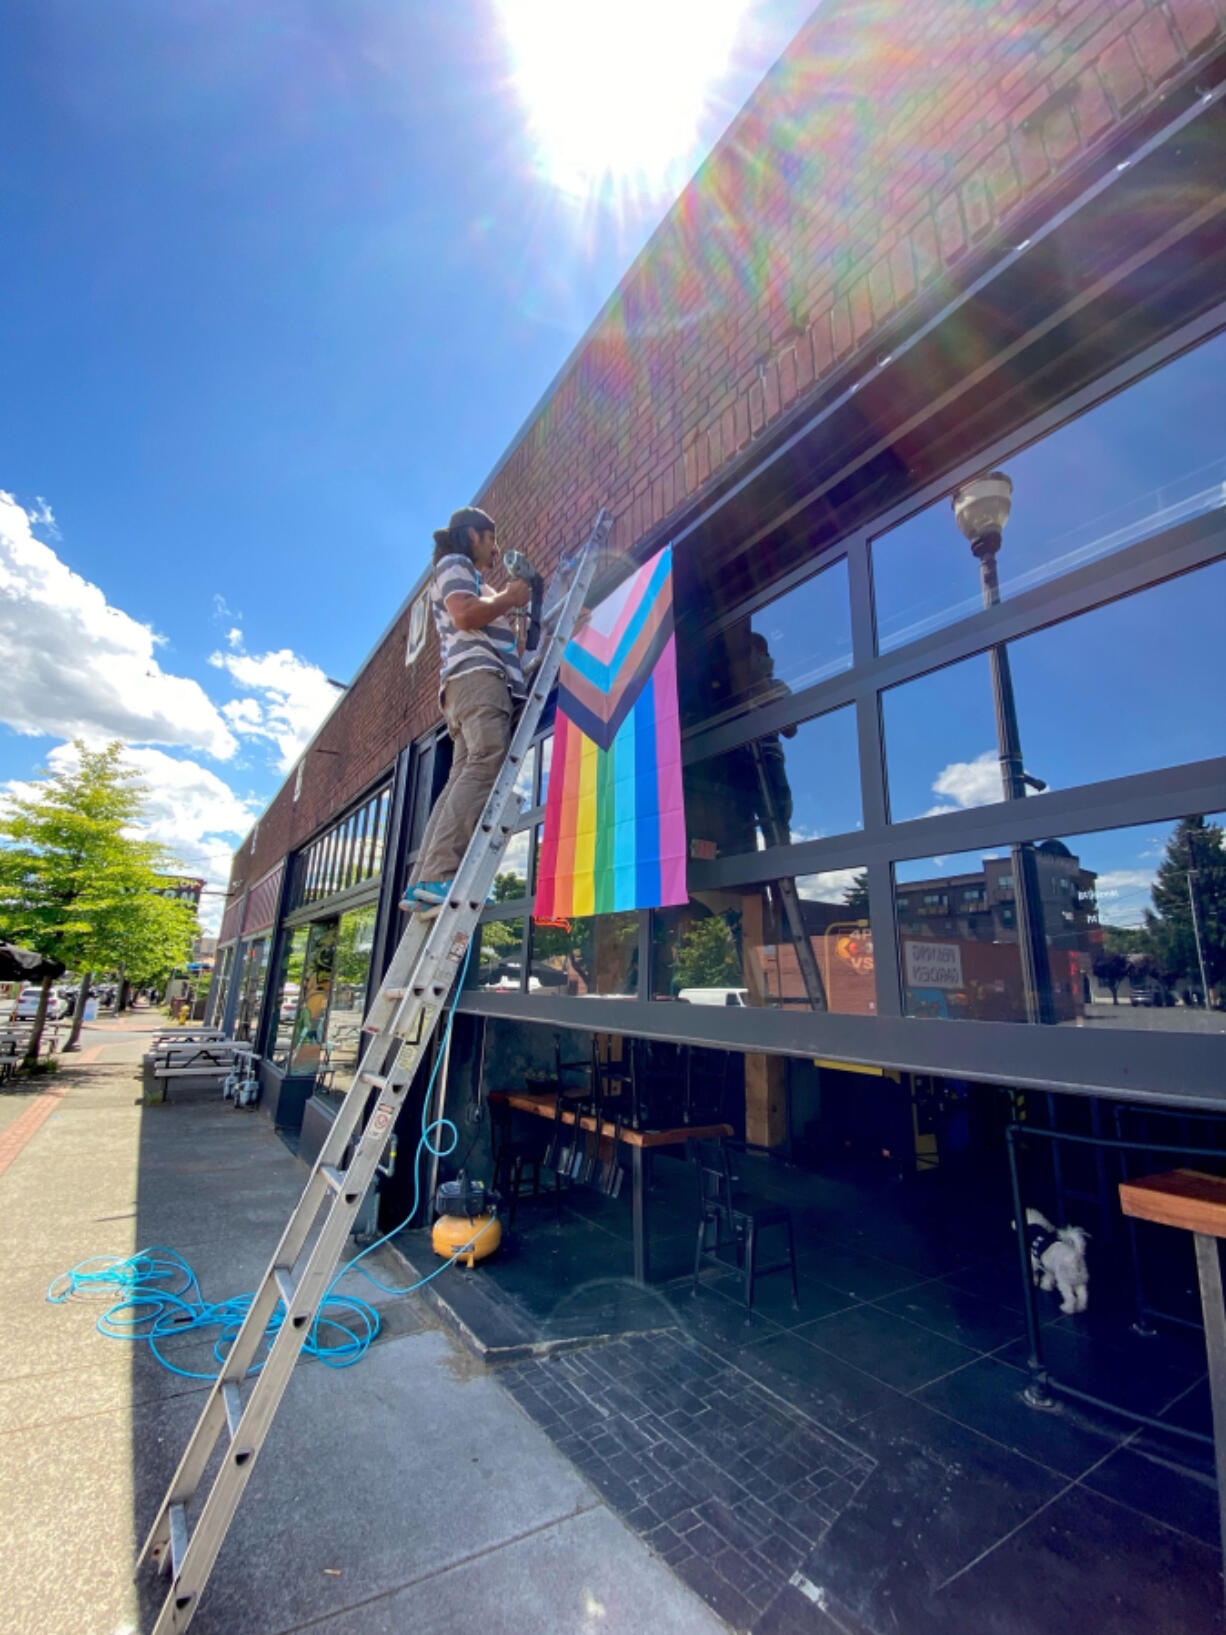 A Thirsty Sasquatch employee hangs new LGBTQ Pride banners Wednesday. Vandals tore down the old banners and smeared feces on the premises.